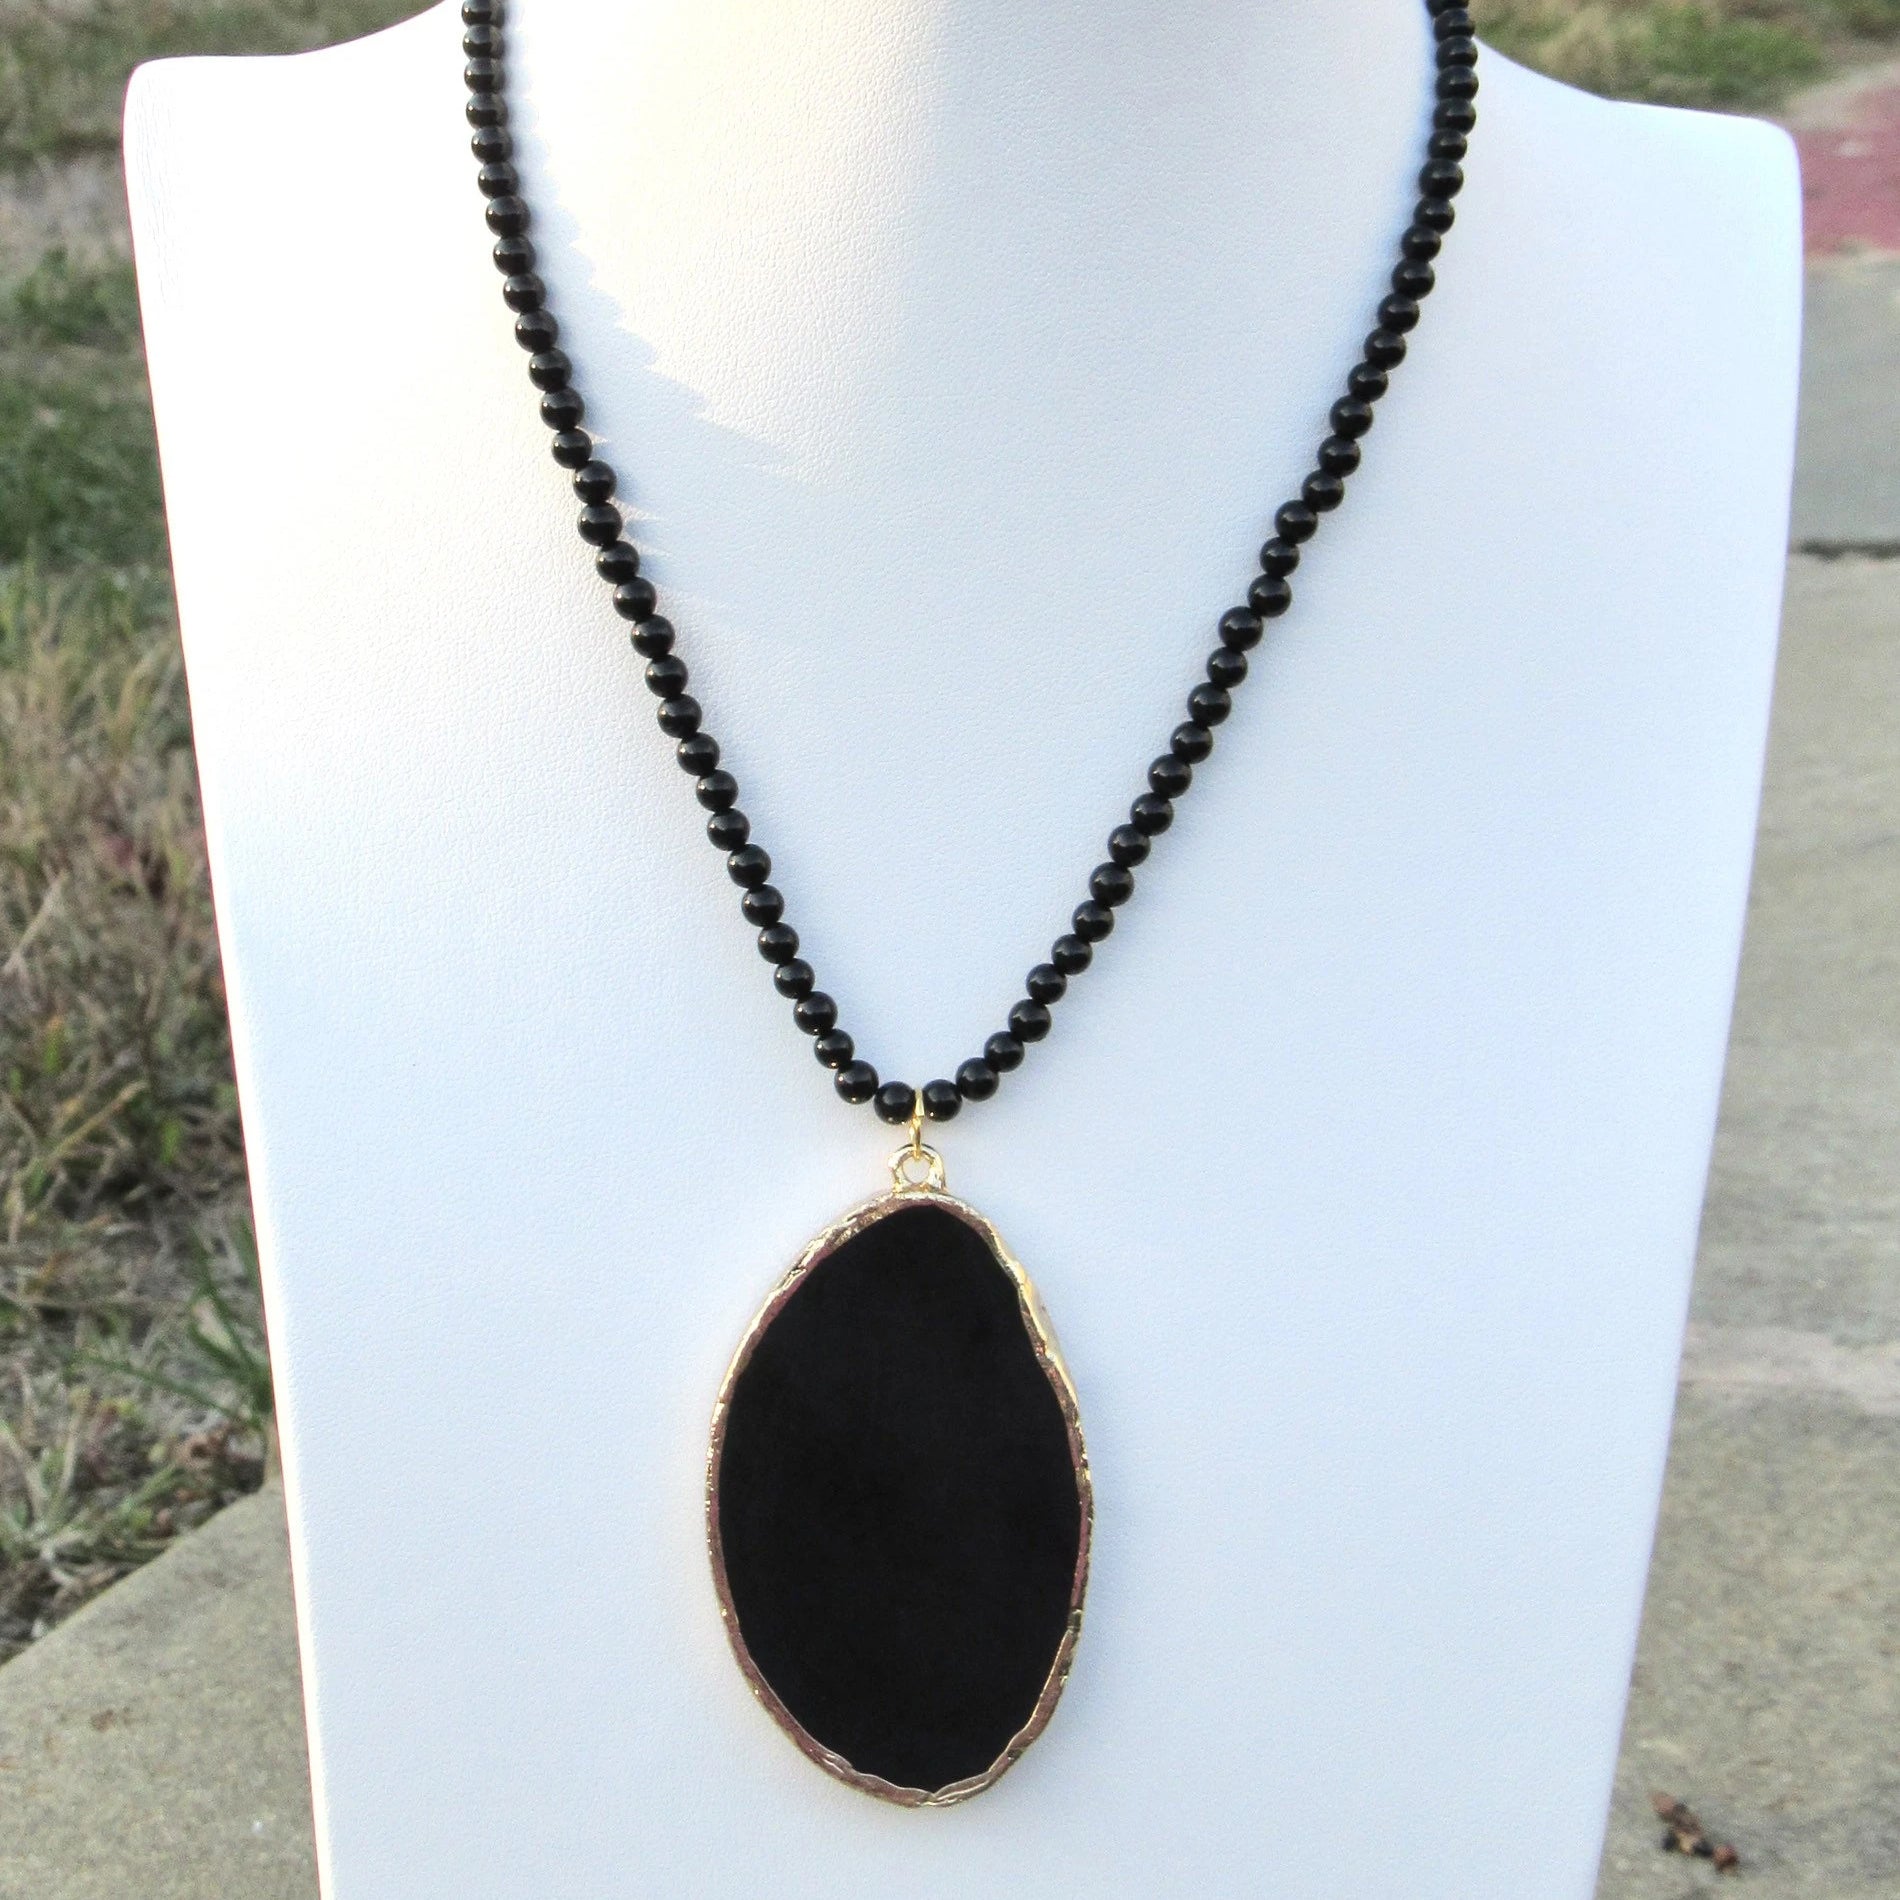 Black Onyx Necklace with Agate Stone Slice Pendant